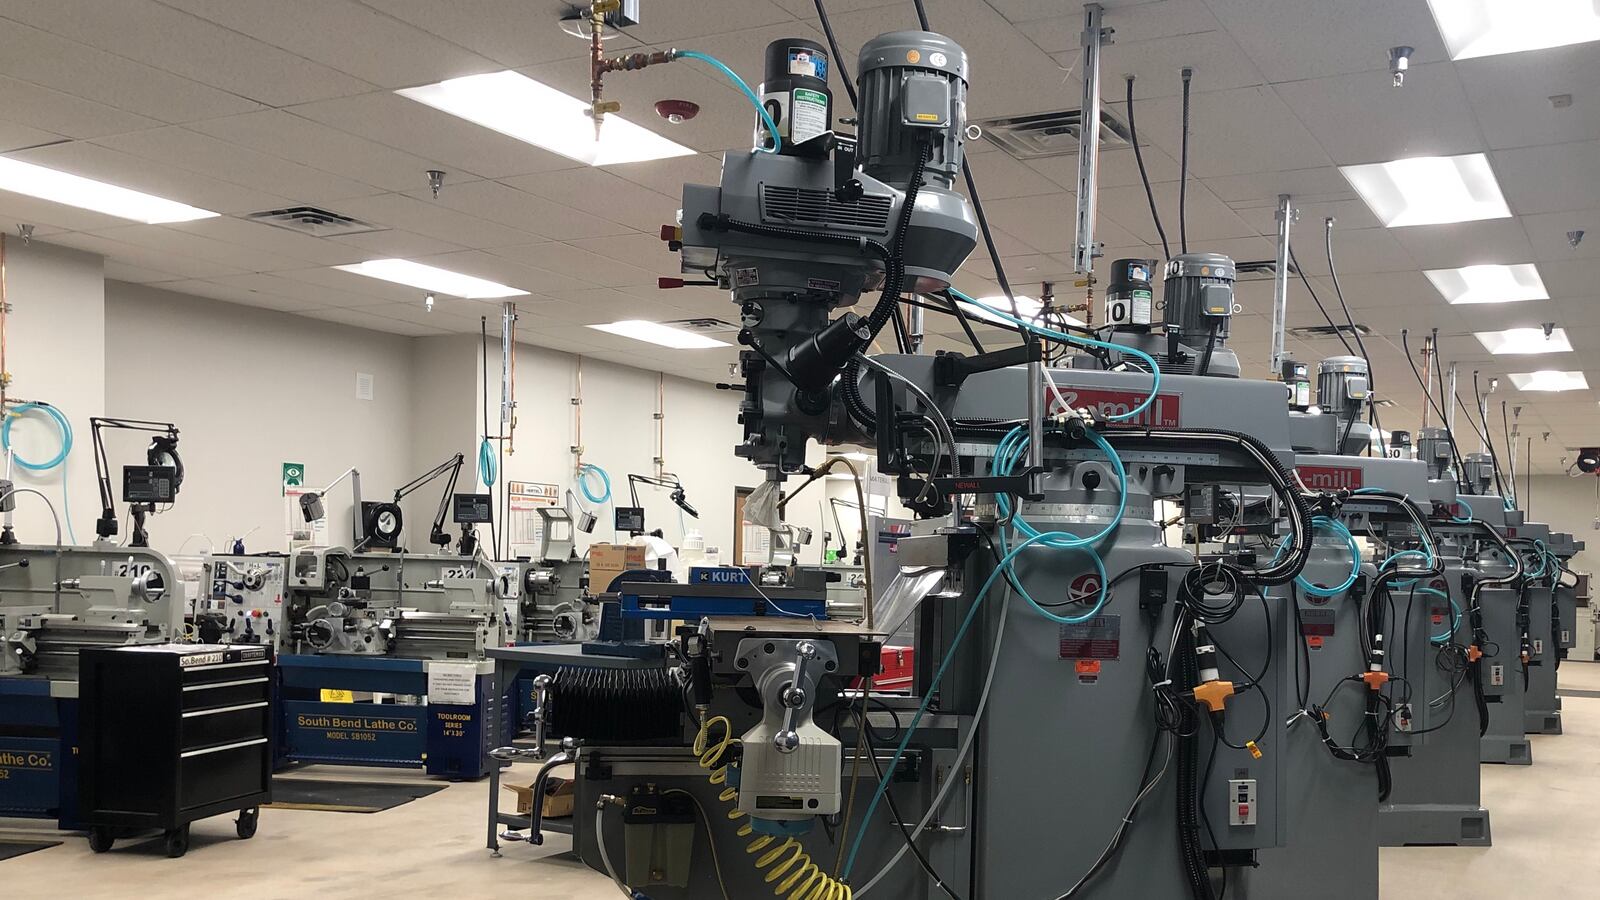 Machines sit ready for learning students at Front Range Community College's new Center for Integrated Manufacturing.